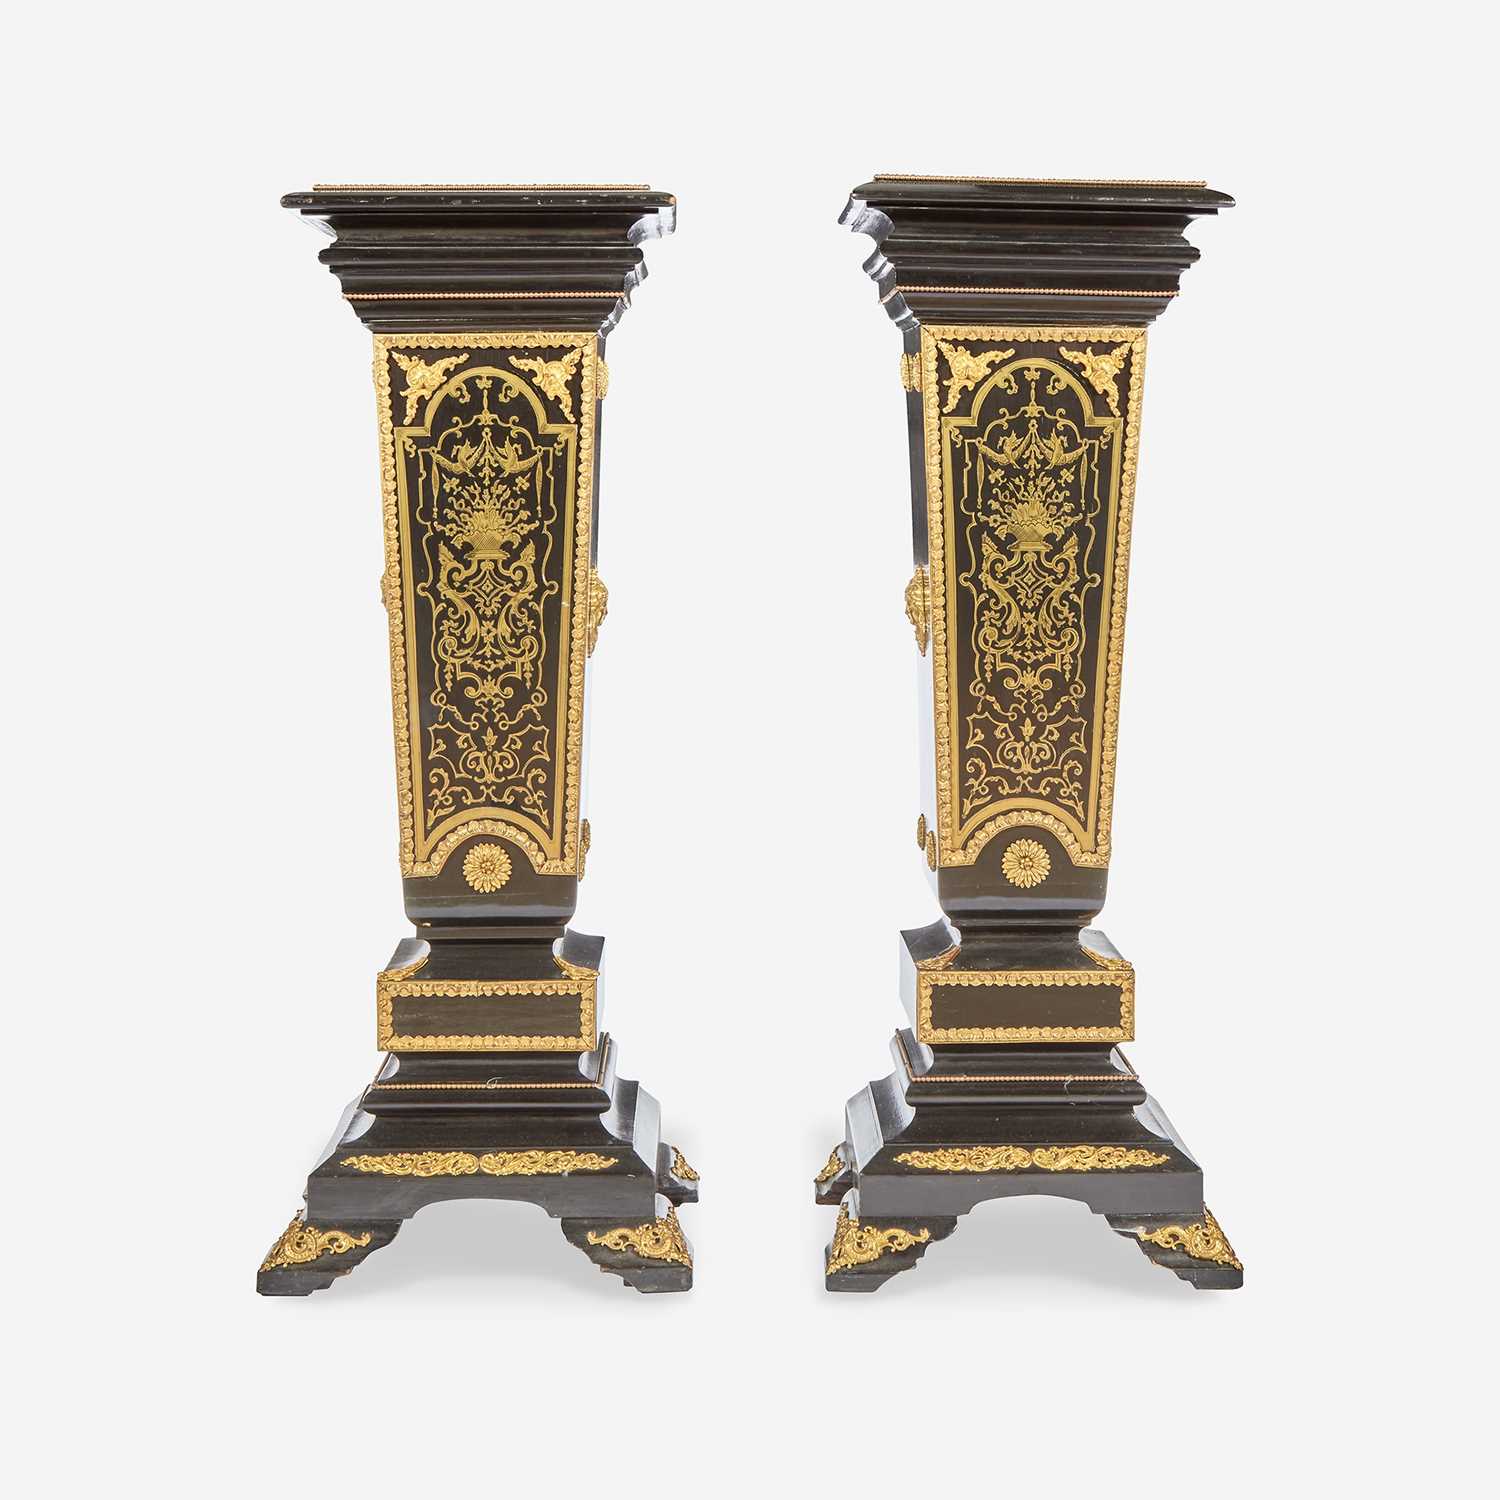 Lot 18 - A Pair of Louis XIV Style Boulle Marquetry Inlaid Gilt-Bronze Mounted Ebonized Marble Top Pedestals